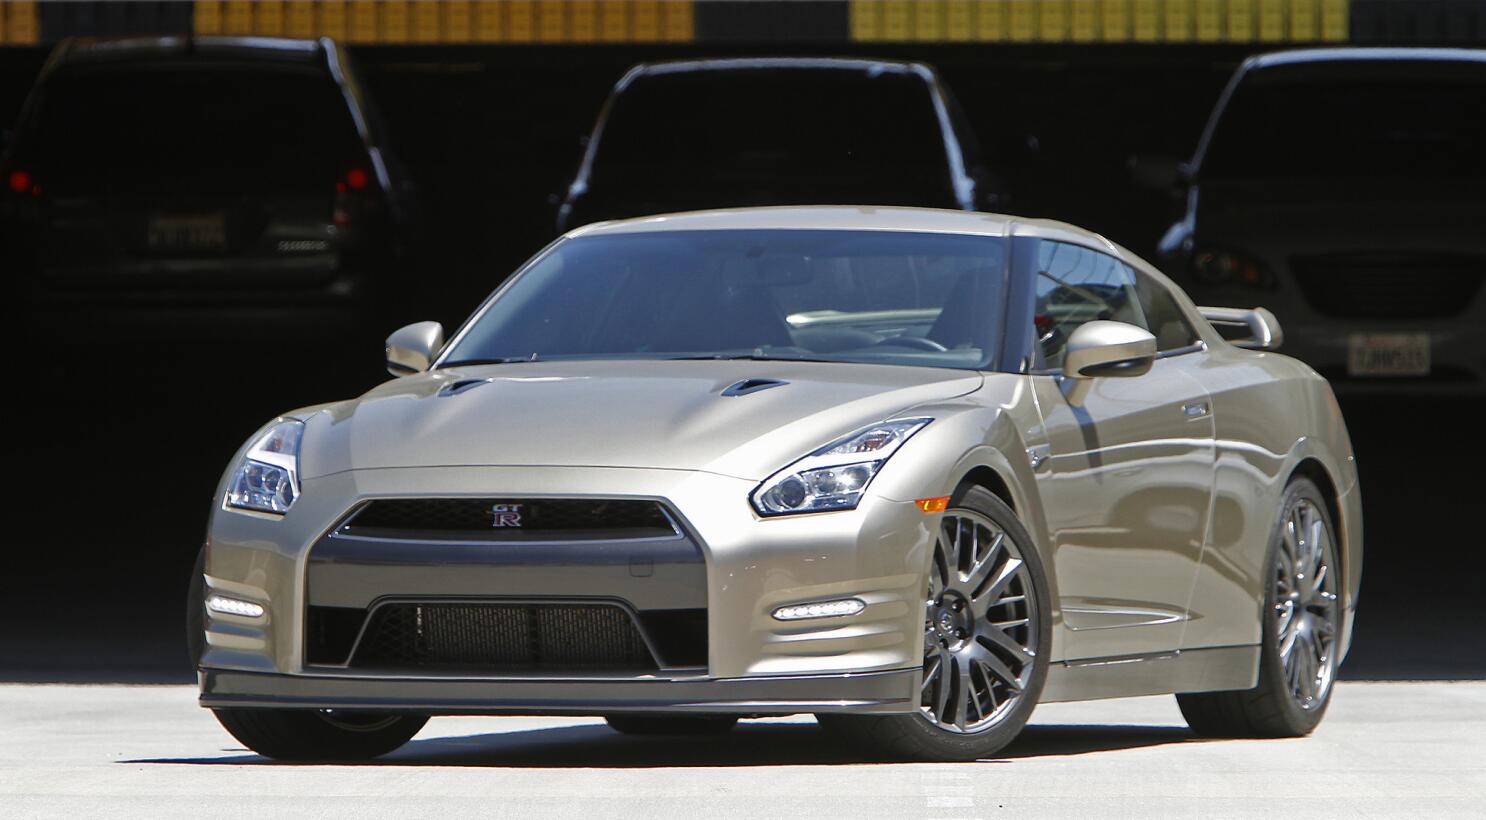 First Drive: The 2015 Nissan GT-R Anniversary Gold Edition - Los